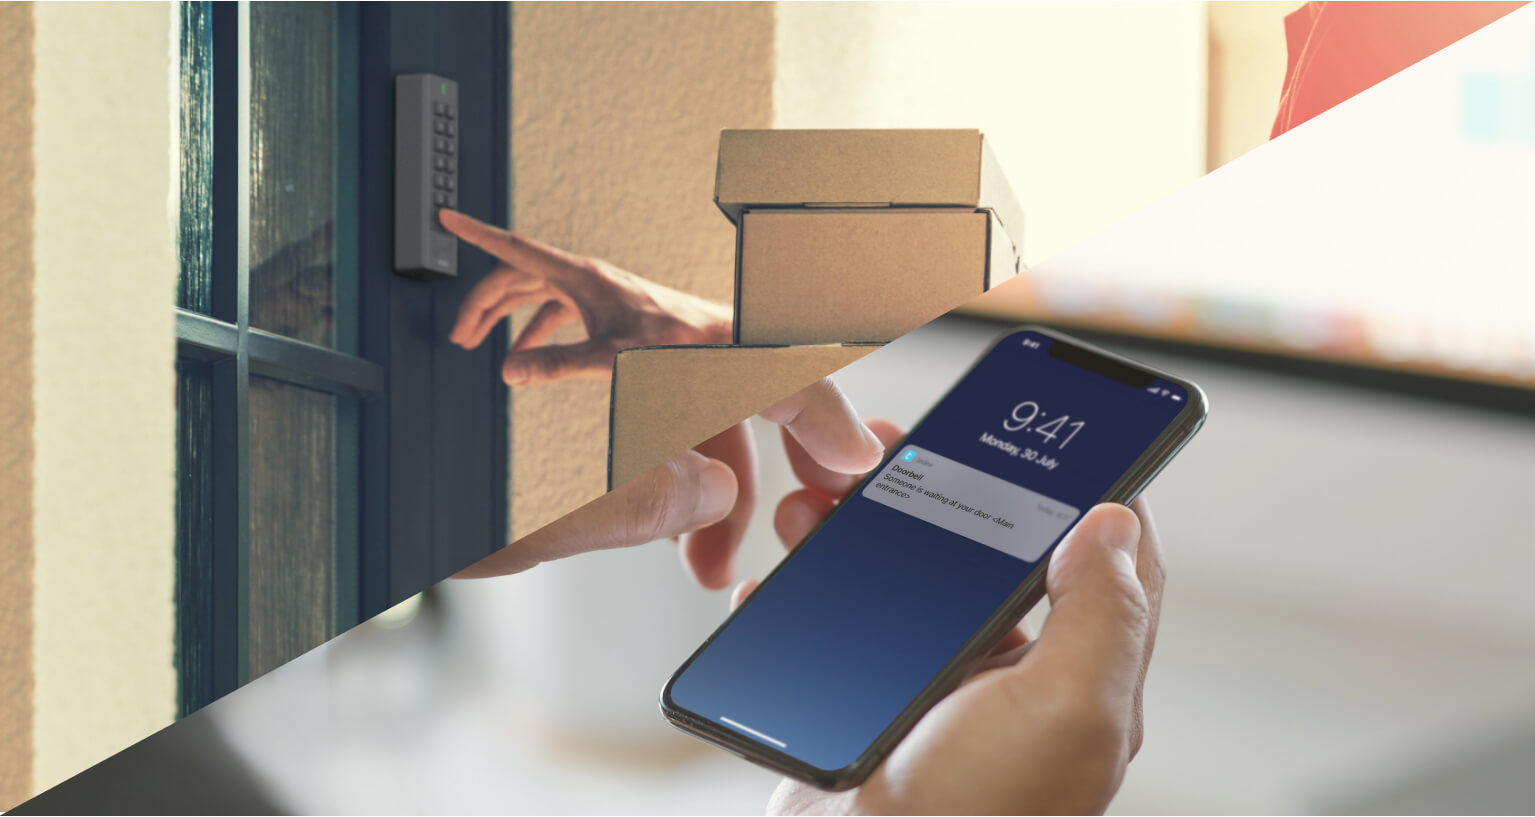 Courier using the keypad and receiving an in-app notification